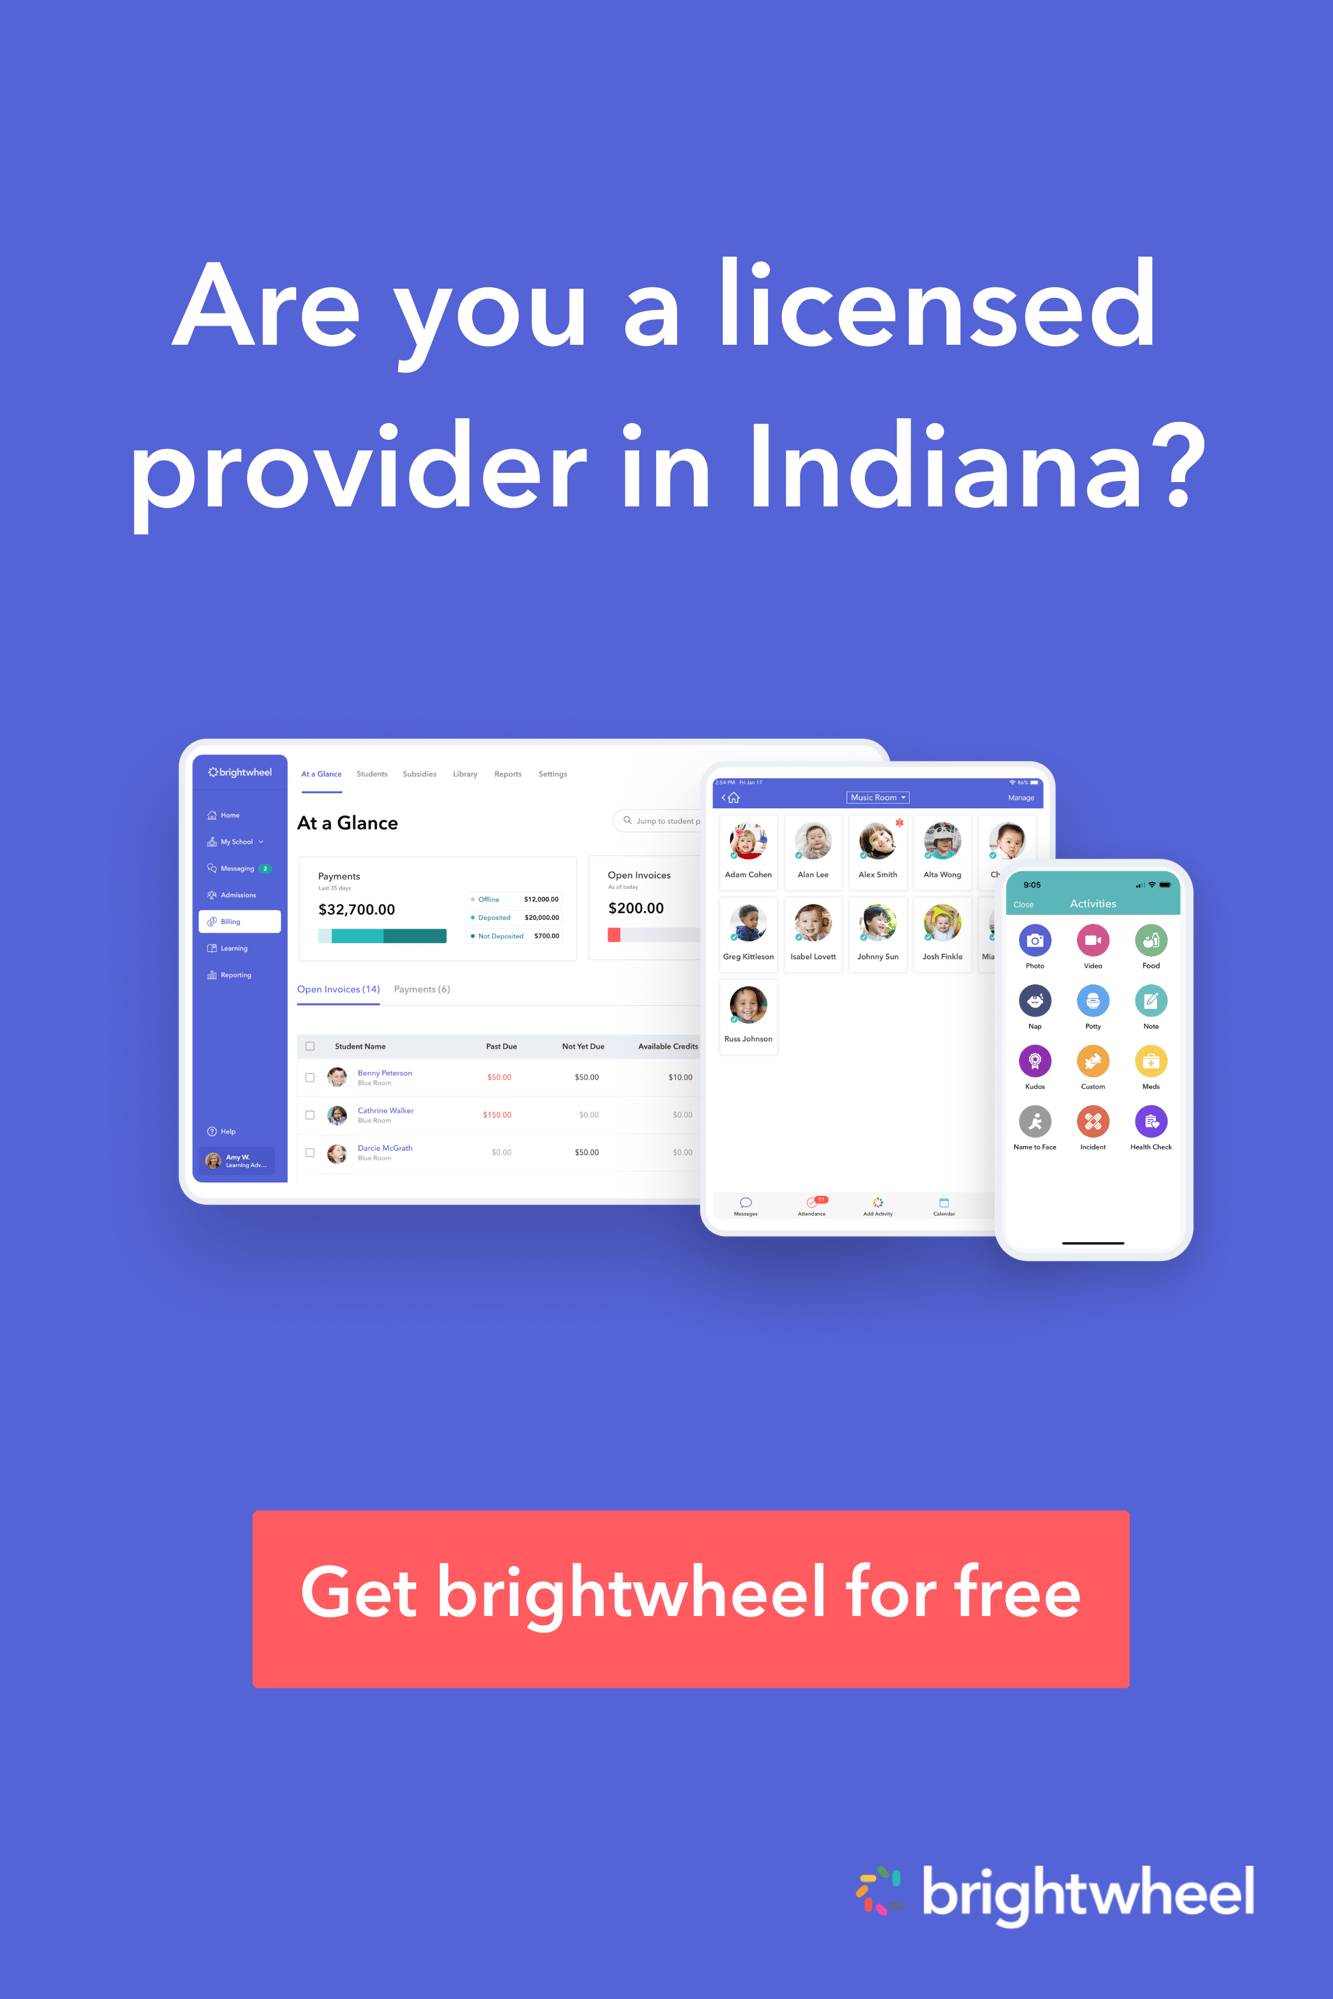 Indiana providers can get brightwheel, the #1 childcare software, for free